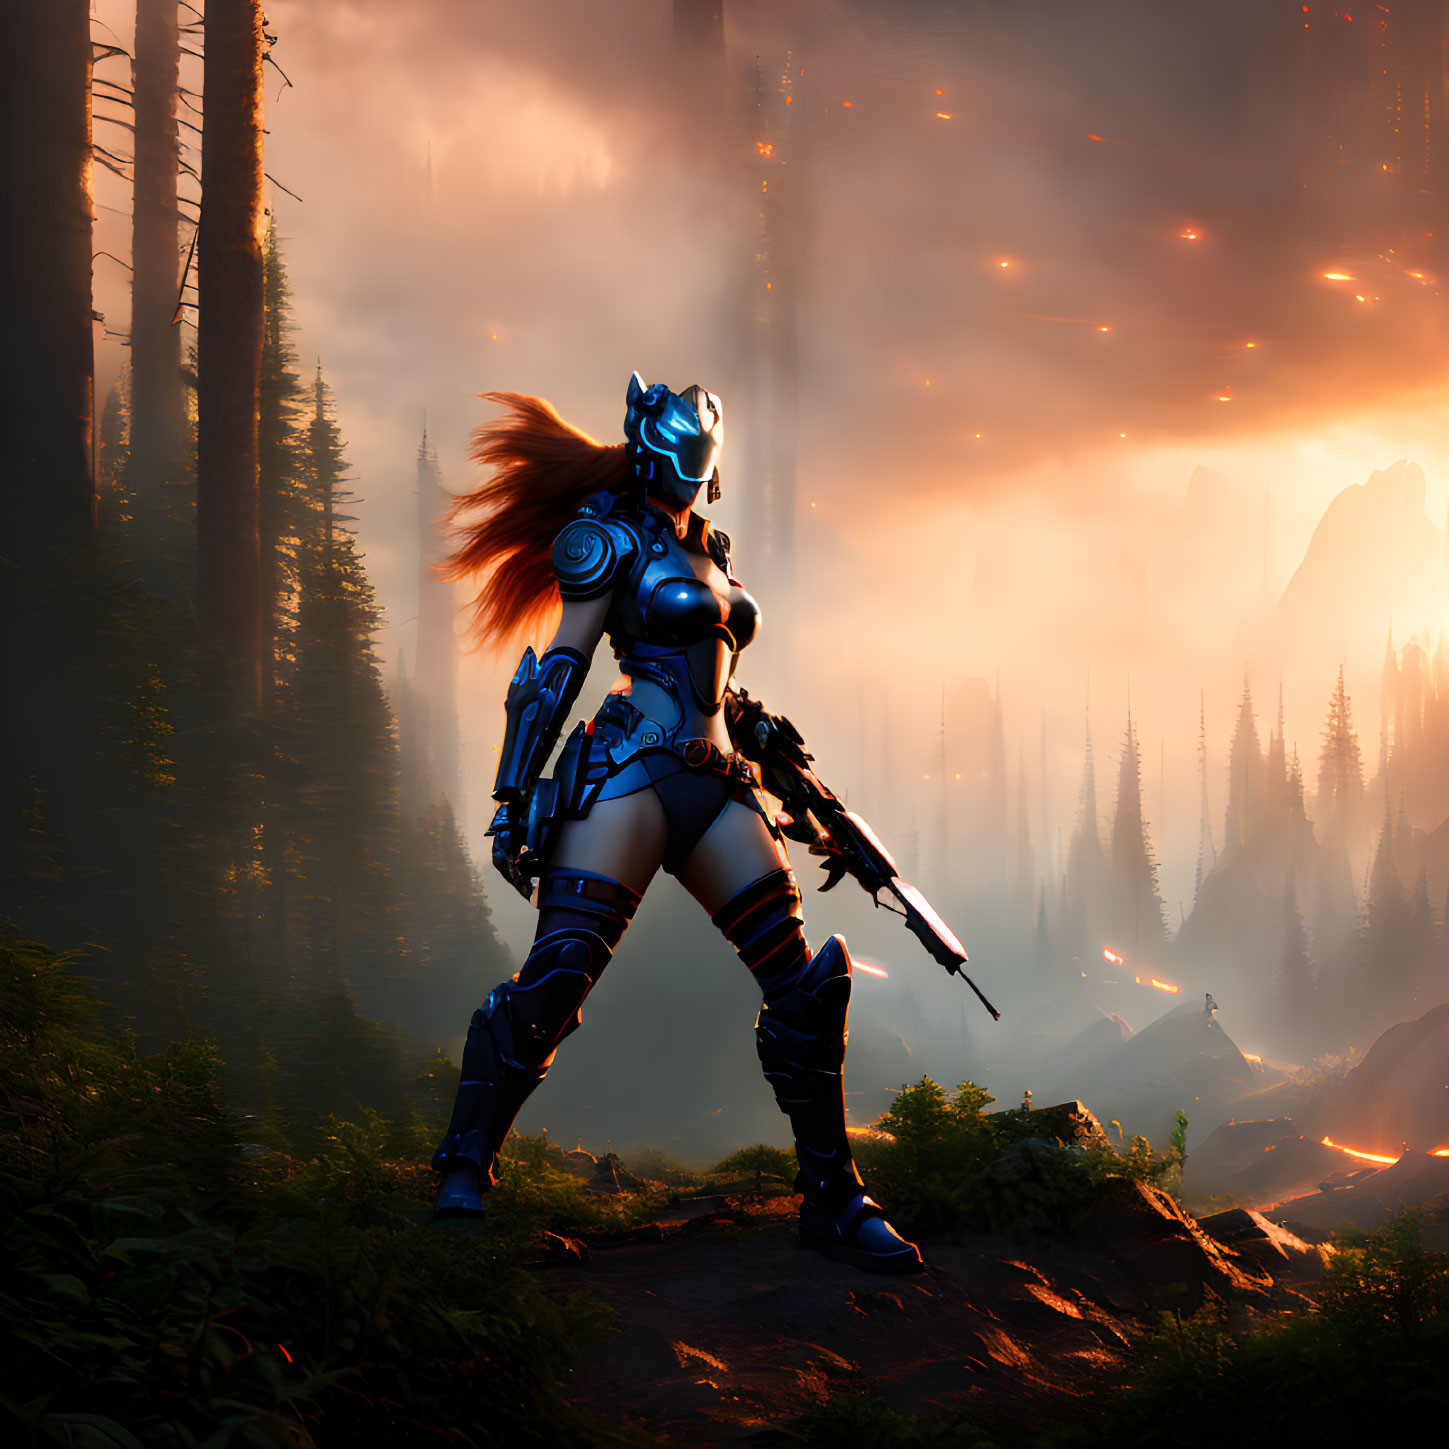 Futuristic warrior in blue armor with glowing rifle in forest at sunset